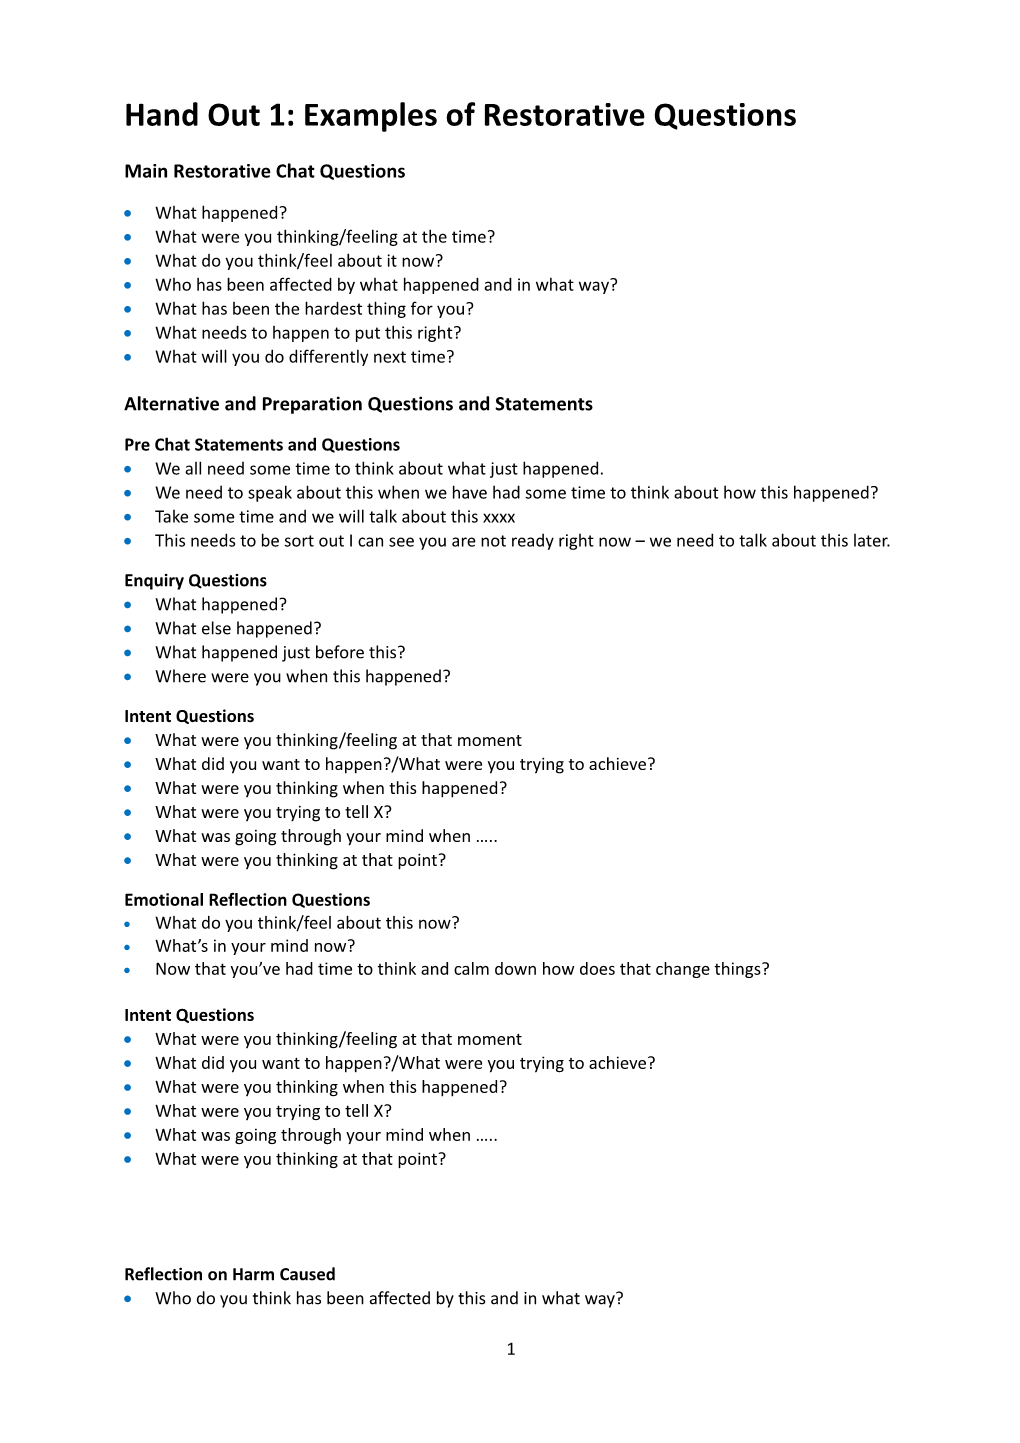 Hand out 1: Examples of Restorative Questions